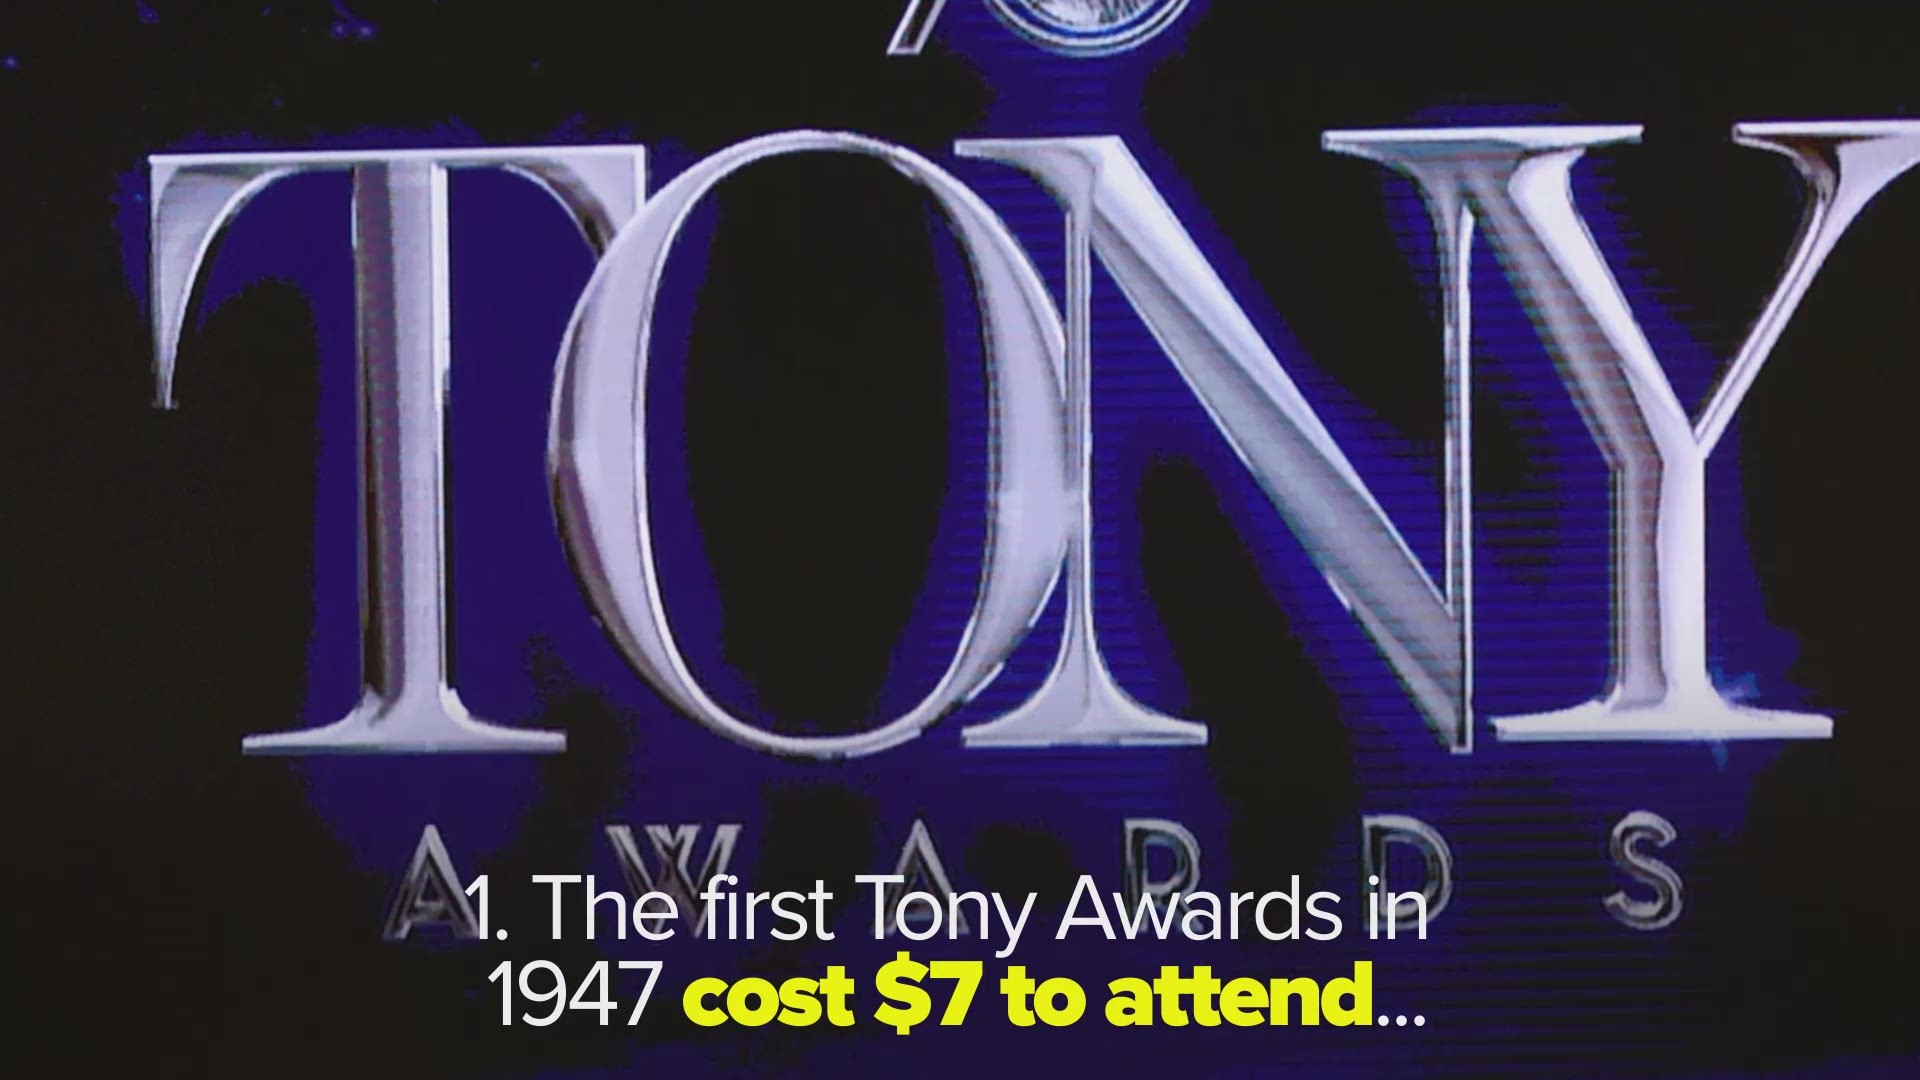 Impress your friends during Broadway's biggest night with these 13 fun facts about the Tony Awards.